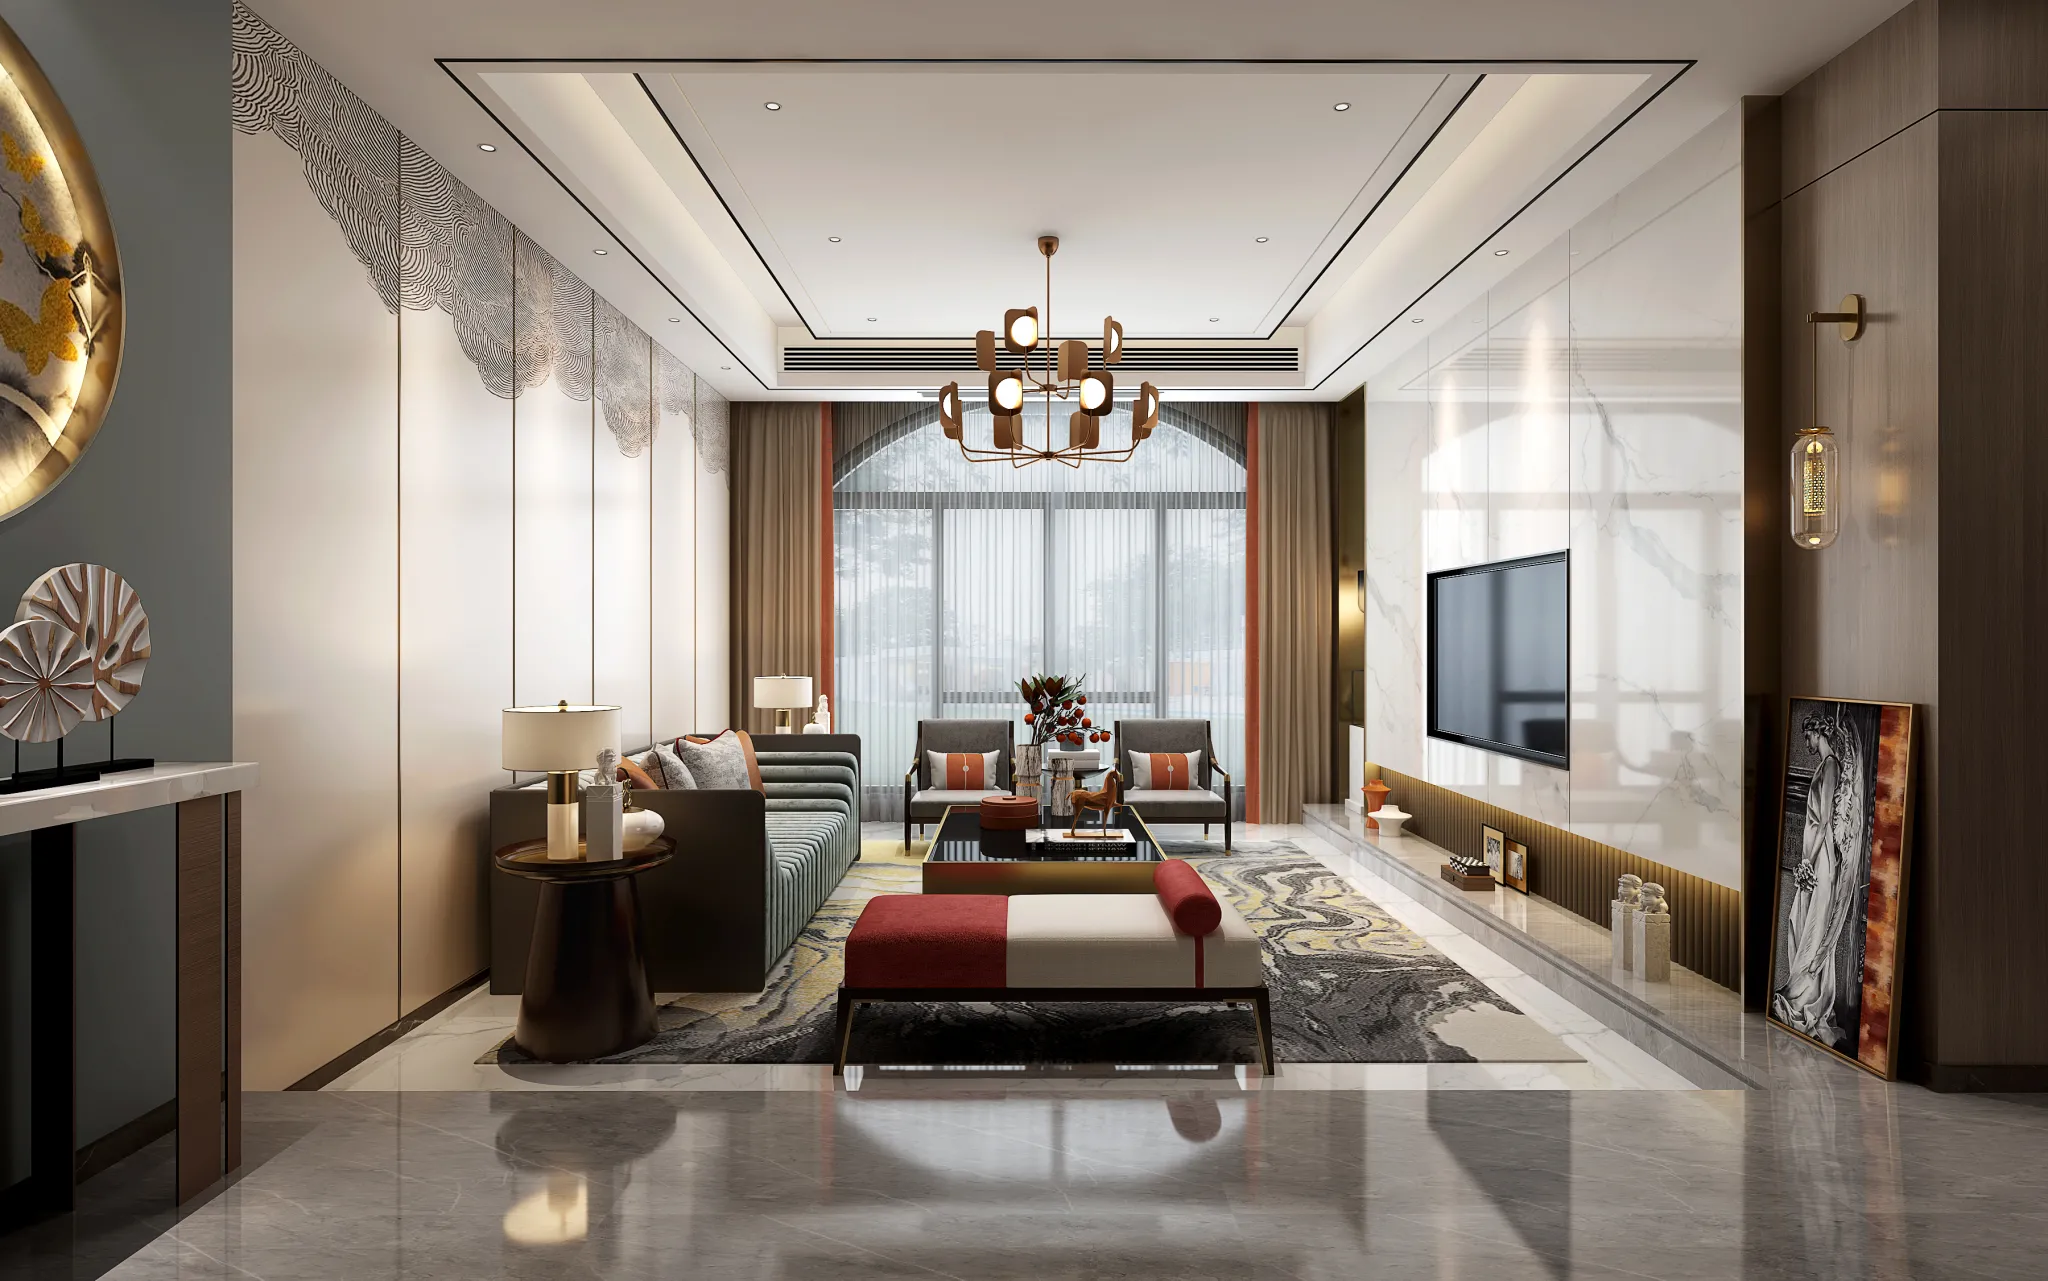 DESMOD INTERIOR 2021 (VRAY) – 4. LIVING ROOM – CHINESE – 69